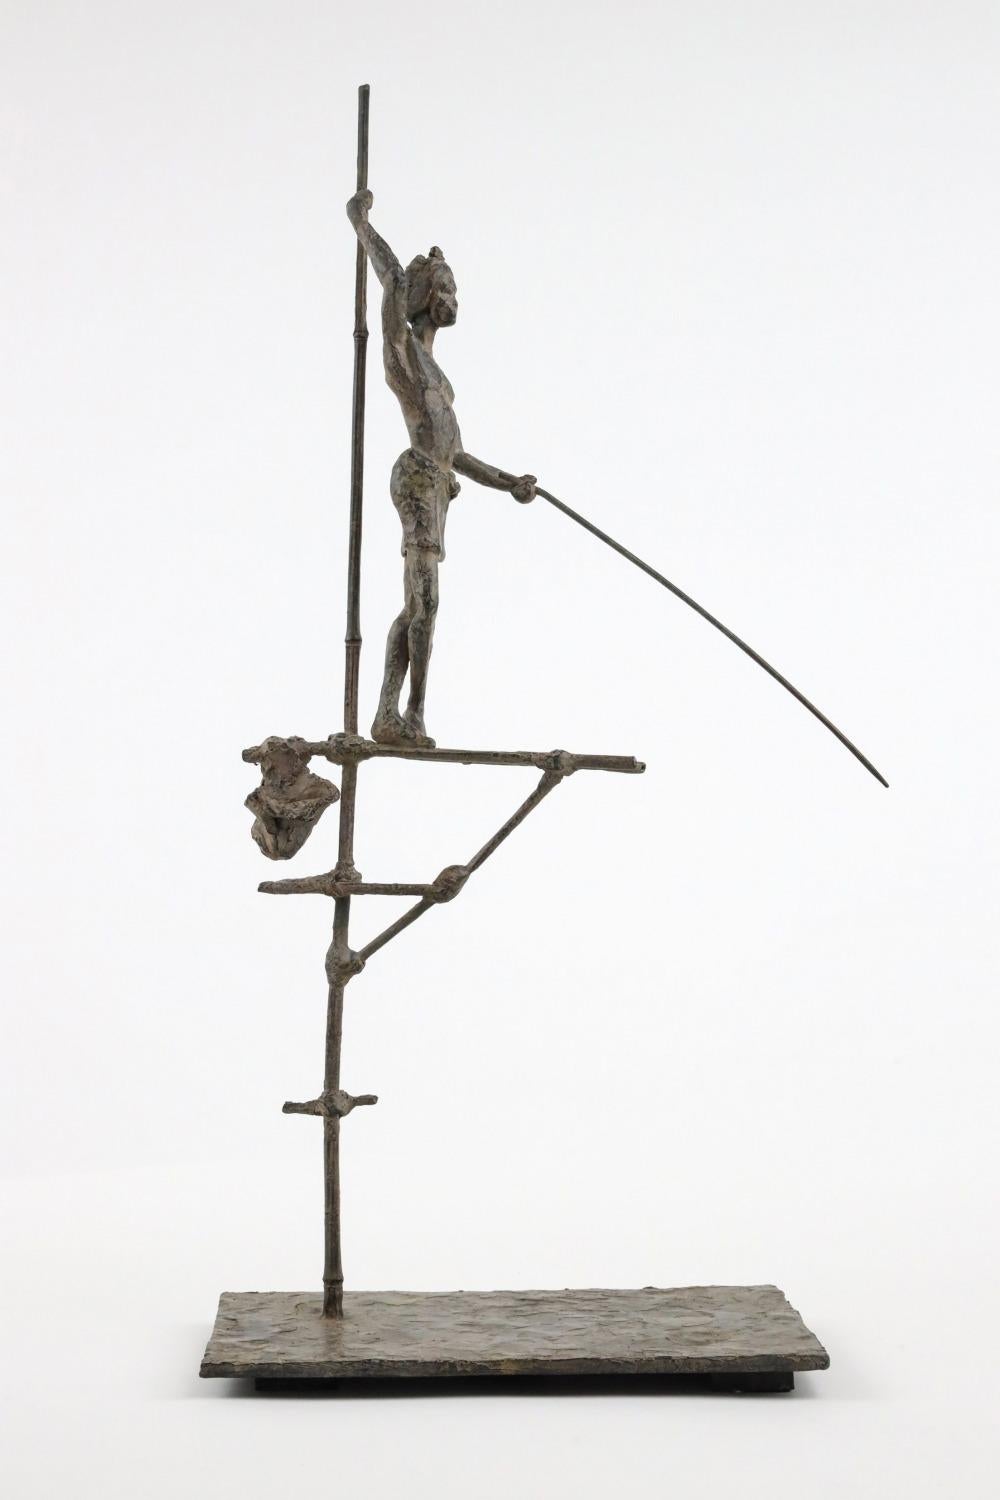 Fisherman on stilt II is a bronze sculpture by French contemporary artist Marine de Soos, dimensions are 50 × 24 × 21 cm (19.7 × 9.4 × 8.3 in). 
The sculpture is signed and numbered, it is part of a limited edition of 8 editions + 4 artist’s proofs,